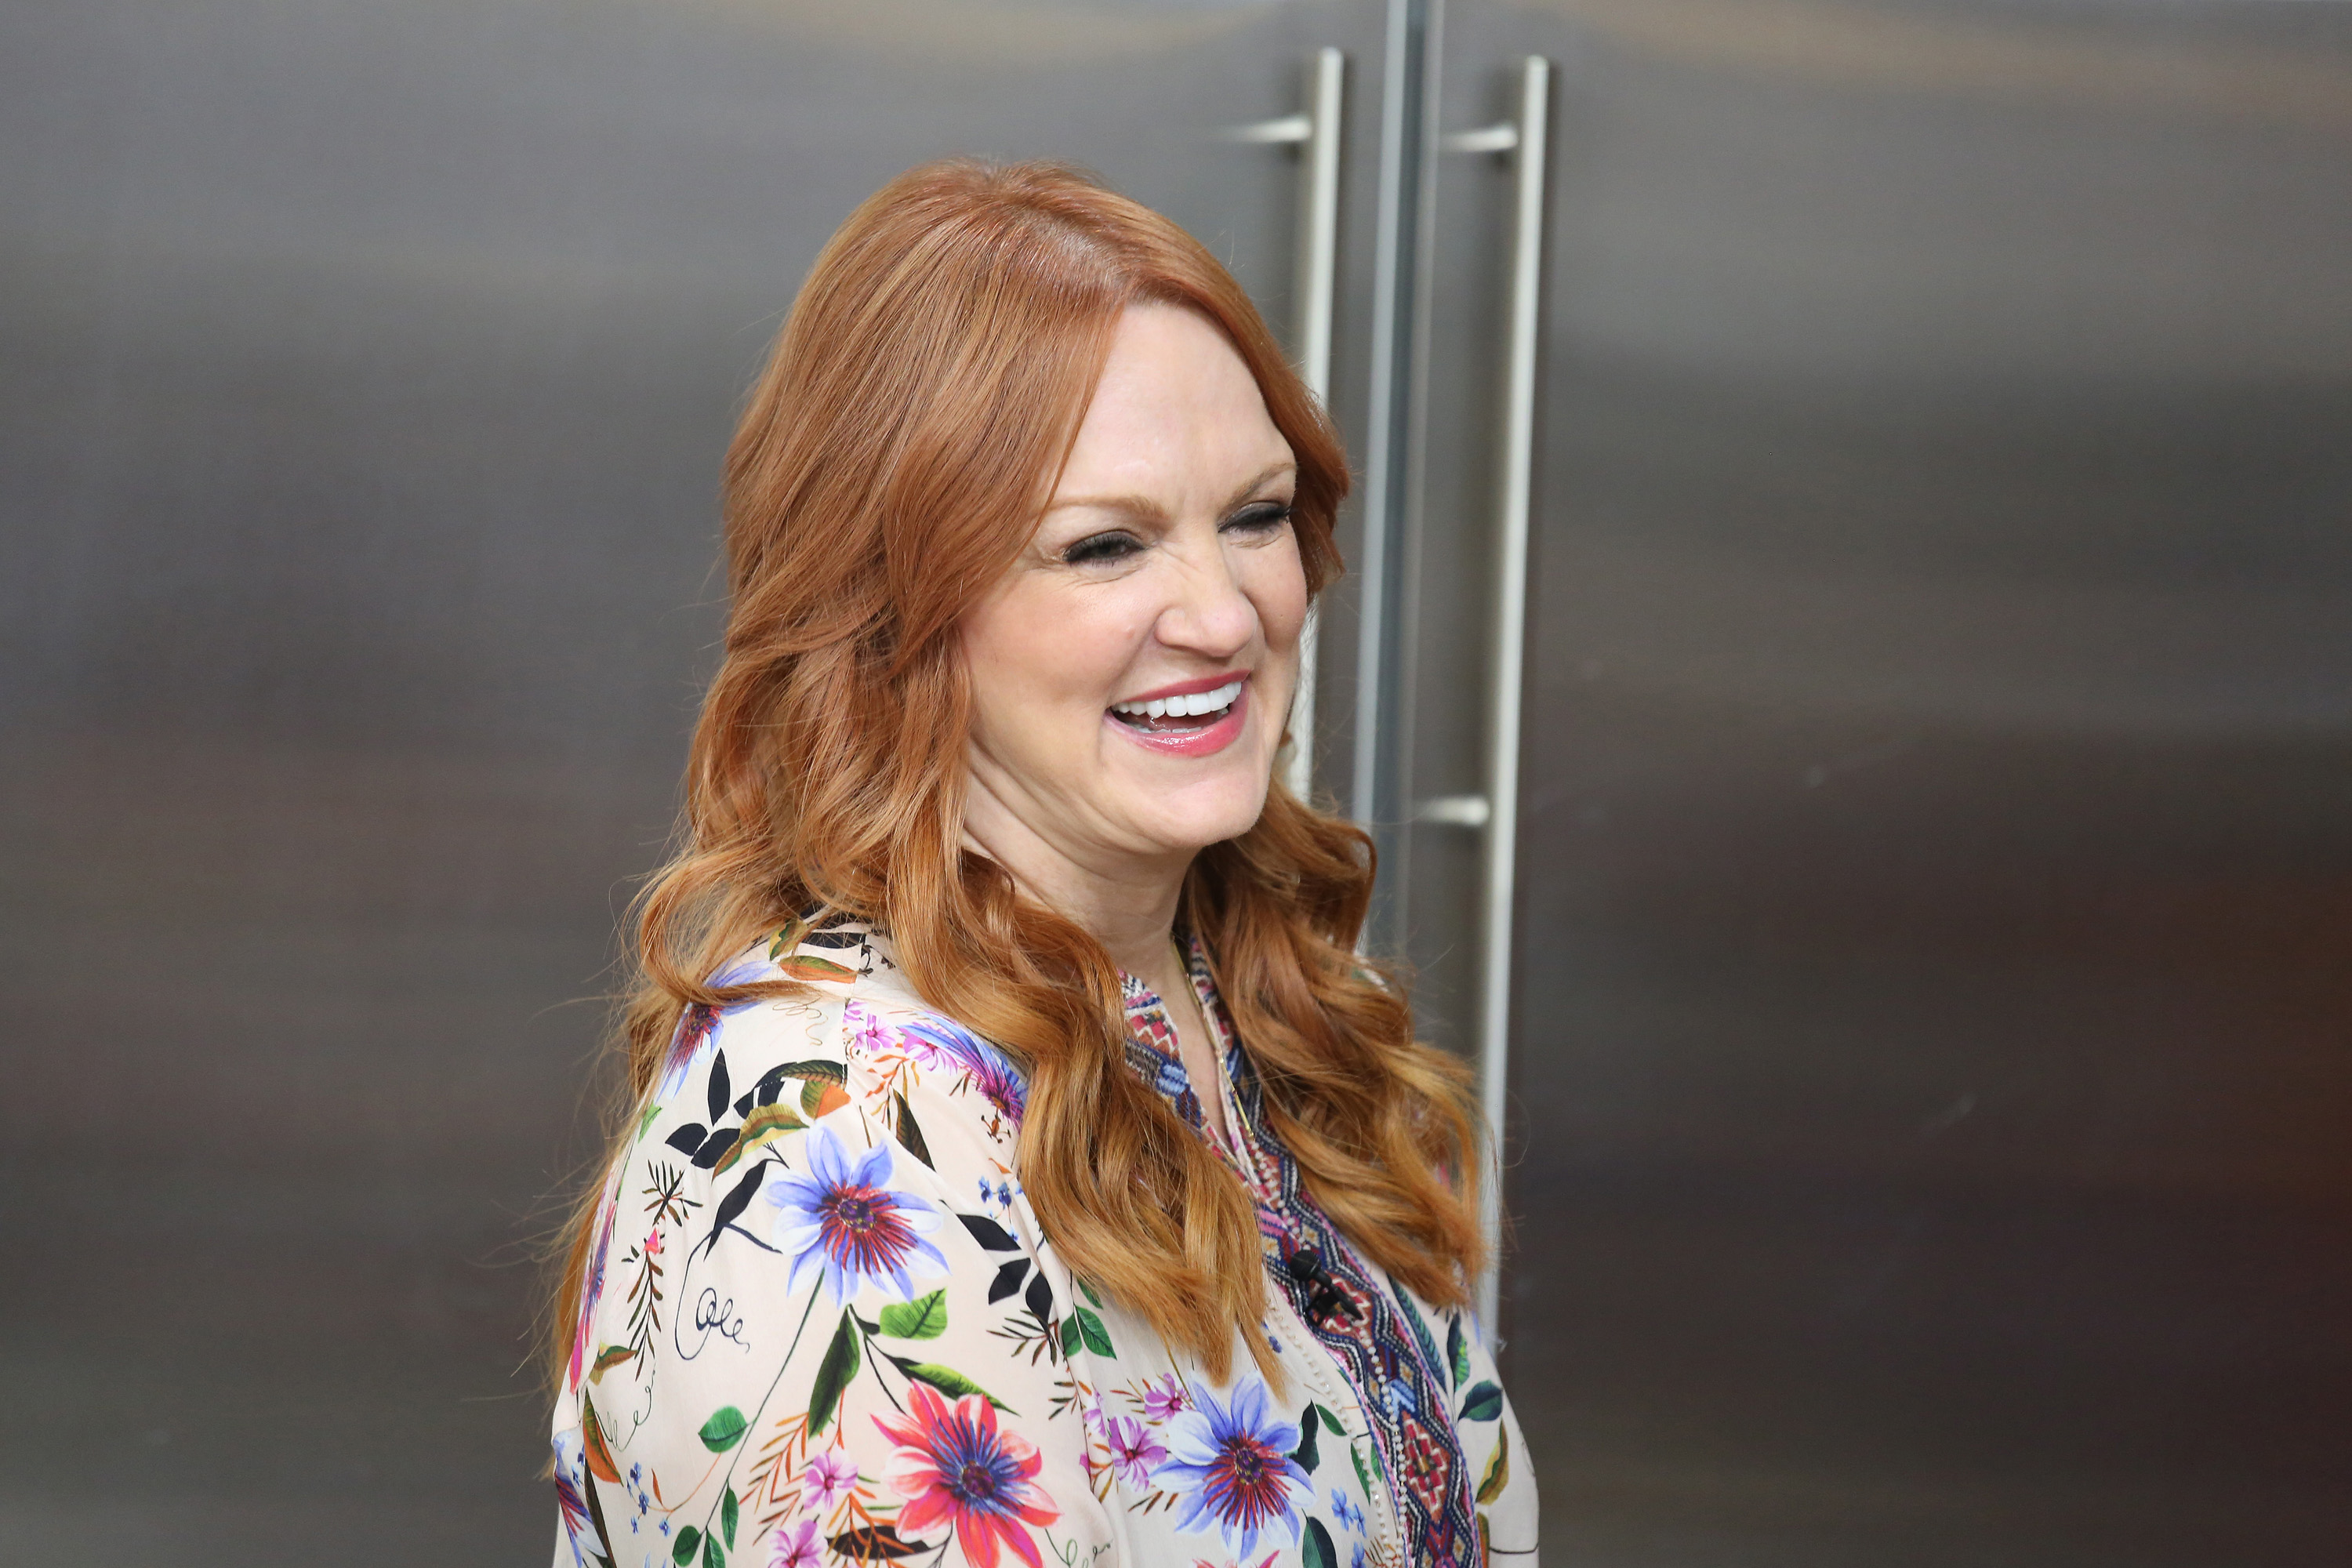 Ree Drummond |Tyler Essary/NBC/NBCU Photo Bank via Getty Images